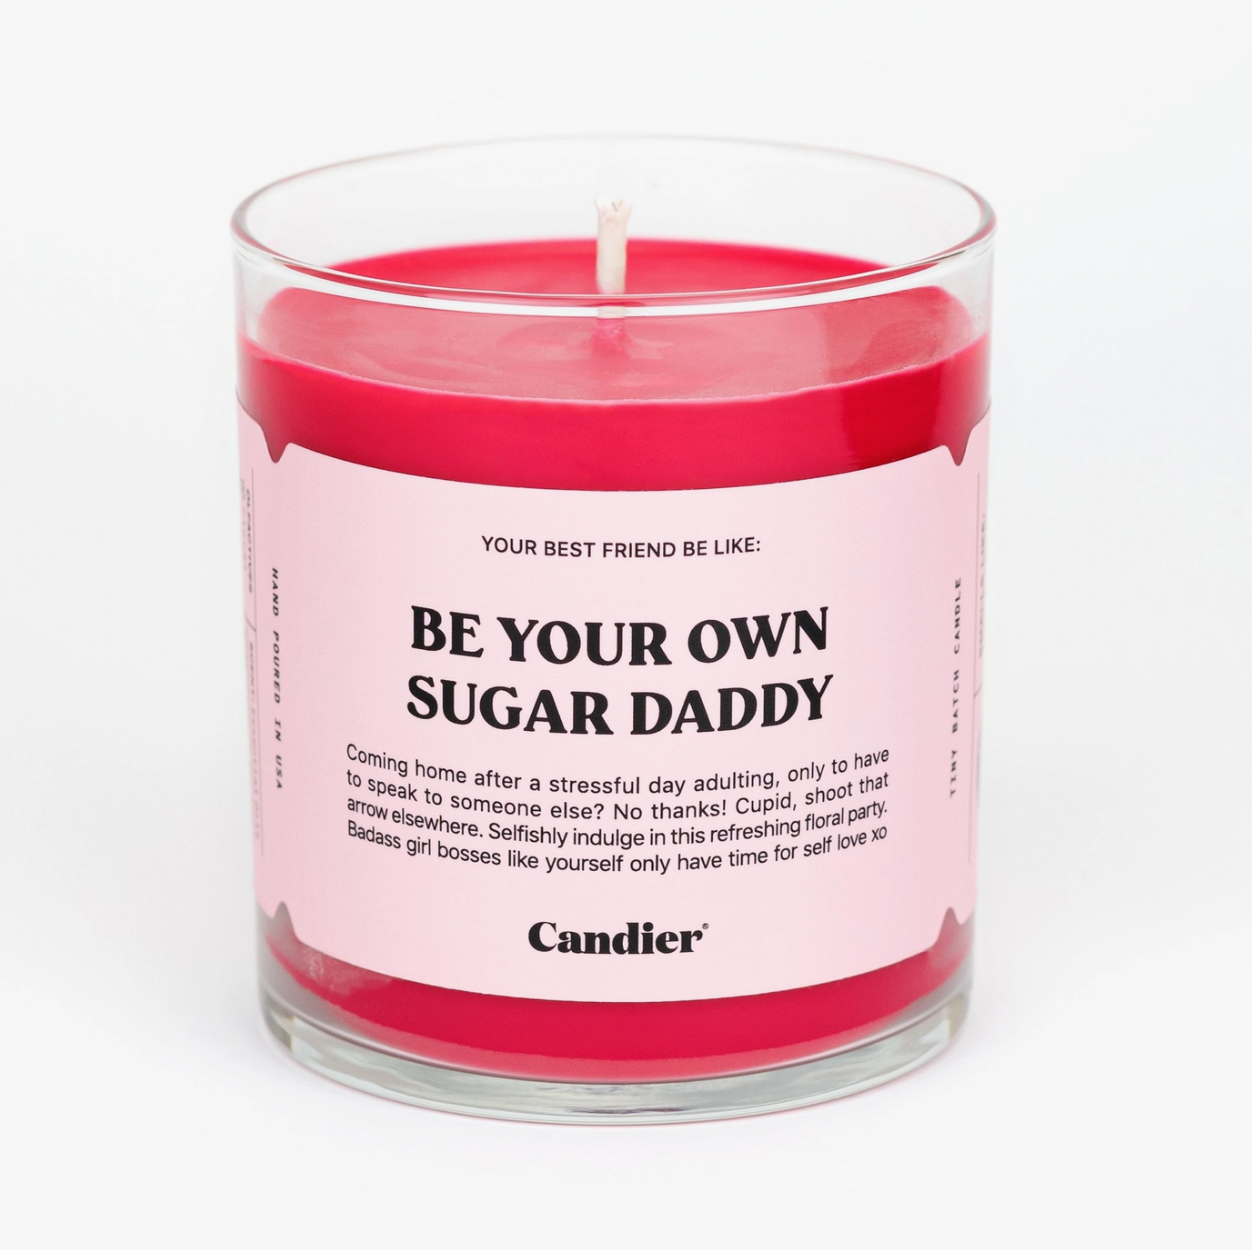 Candier "GIRL, YOU NEED TO CALM THE F DOWN" 100% Soy Pink candle